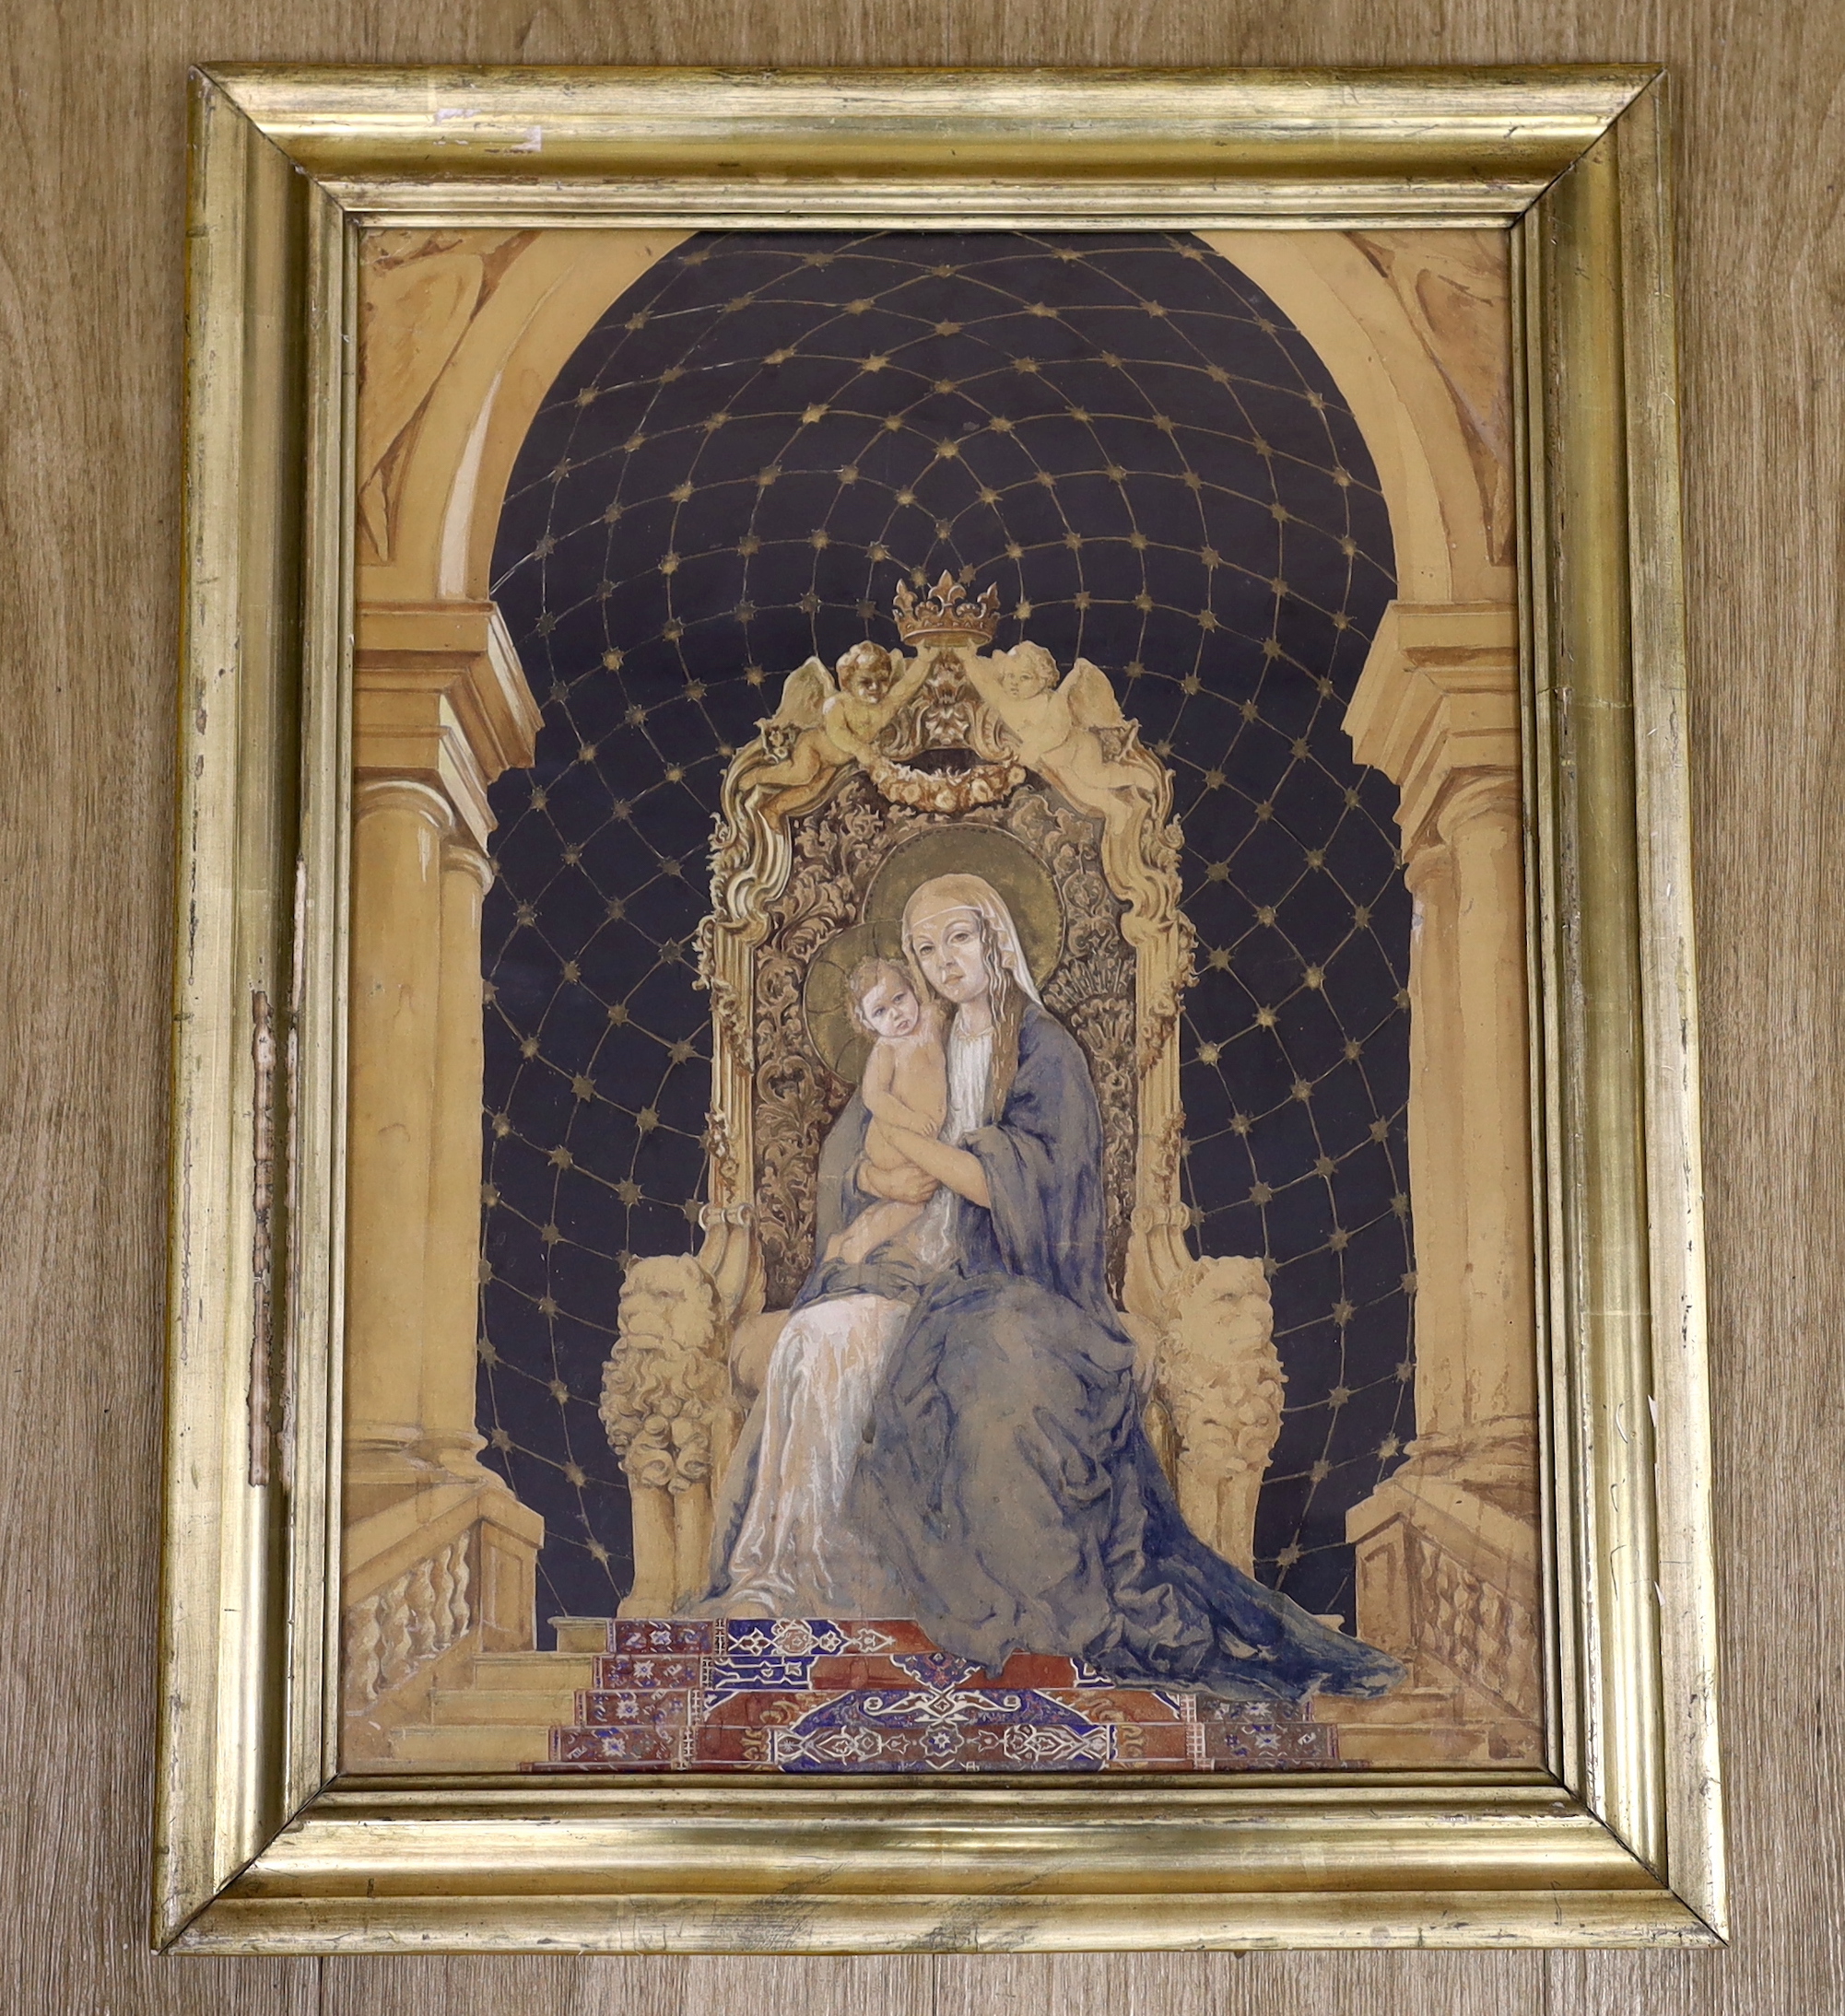 Continental School, heightened watercolour, Study of the Virgin Mary and Child seated on a throne, - Image 2 of 4